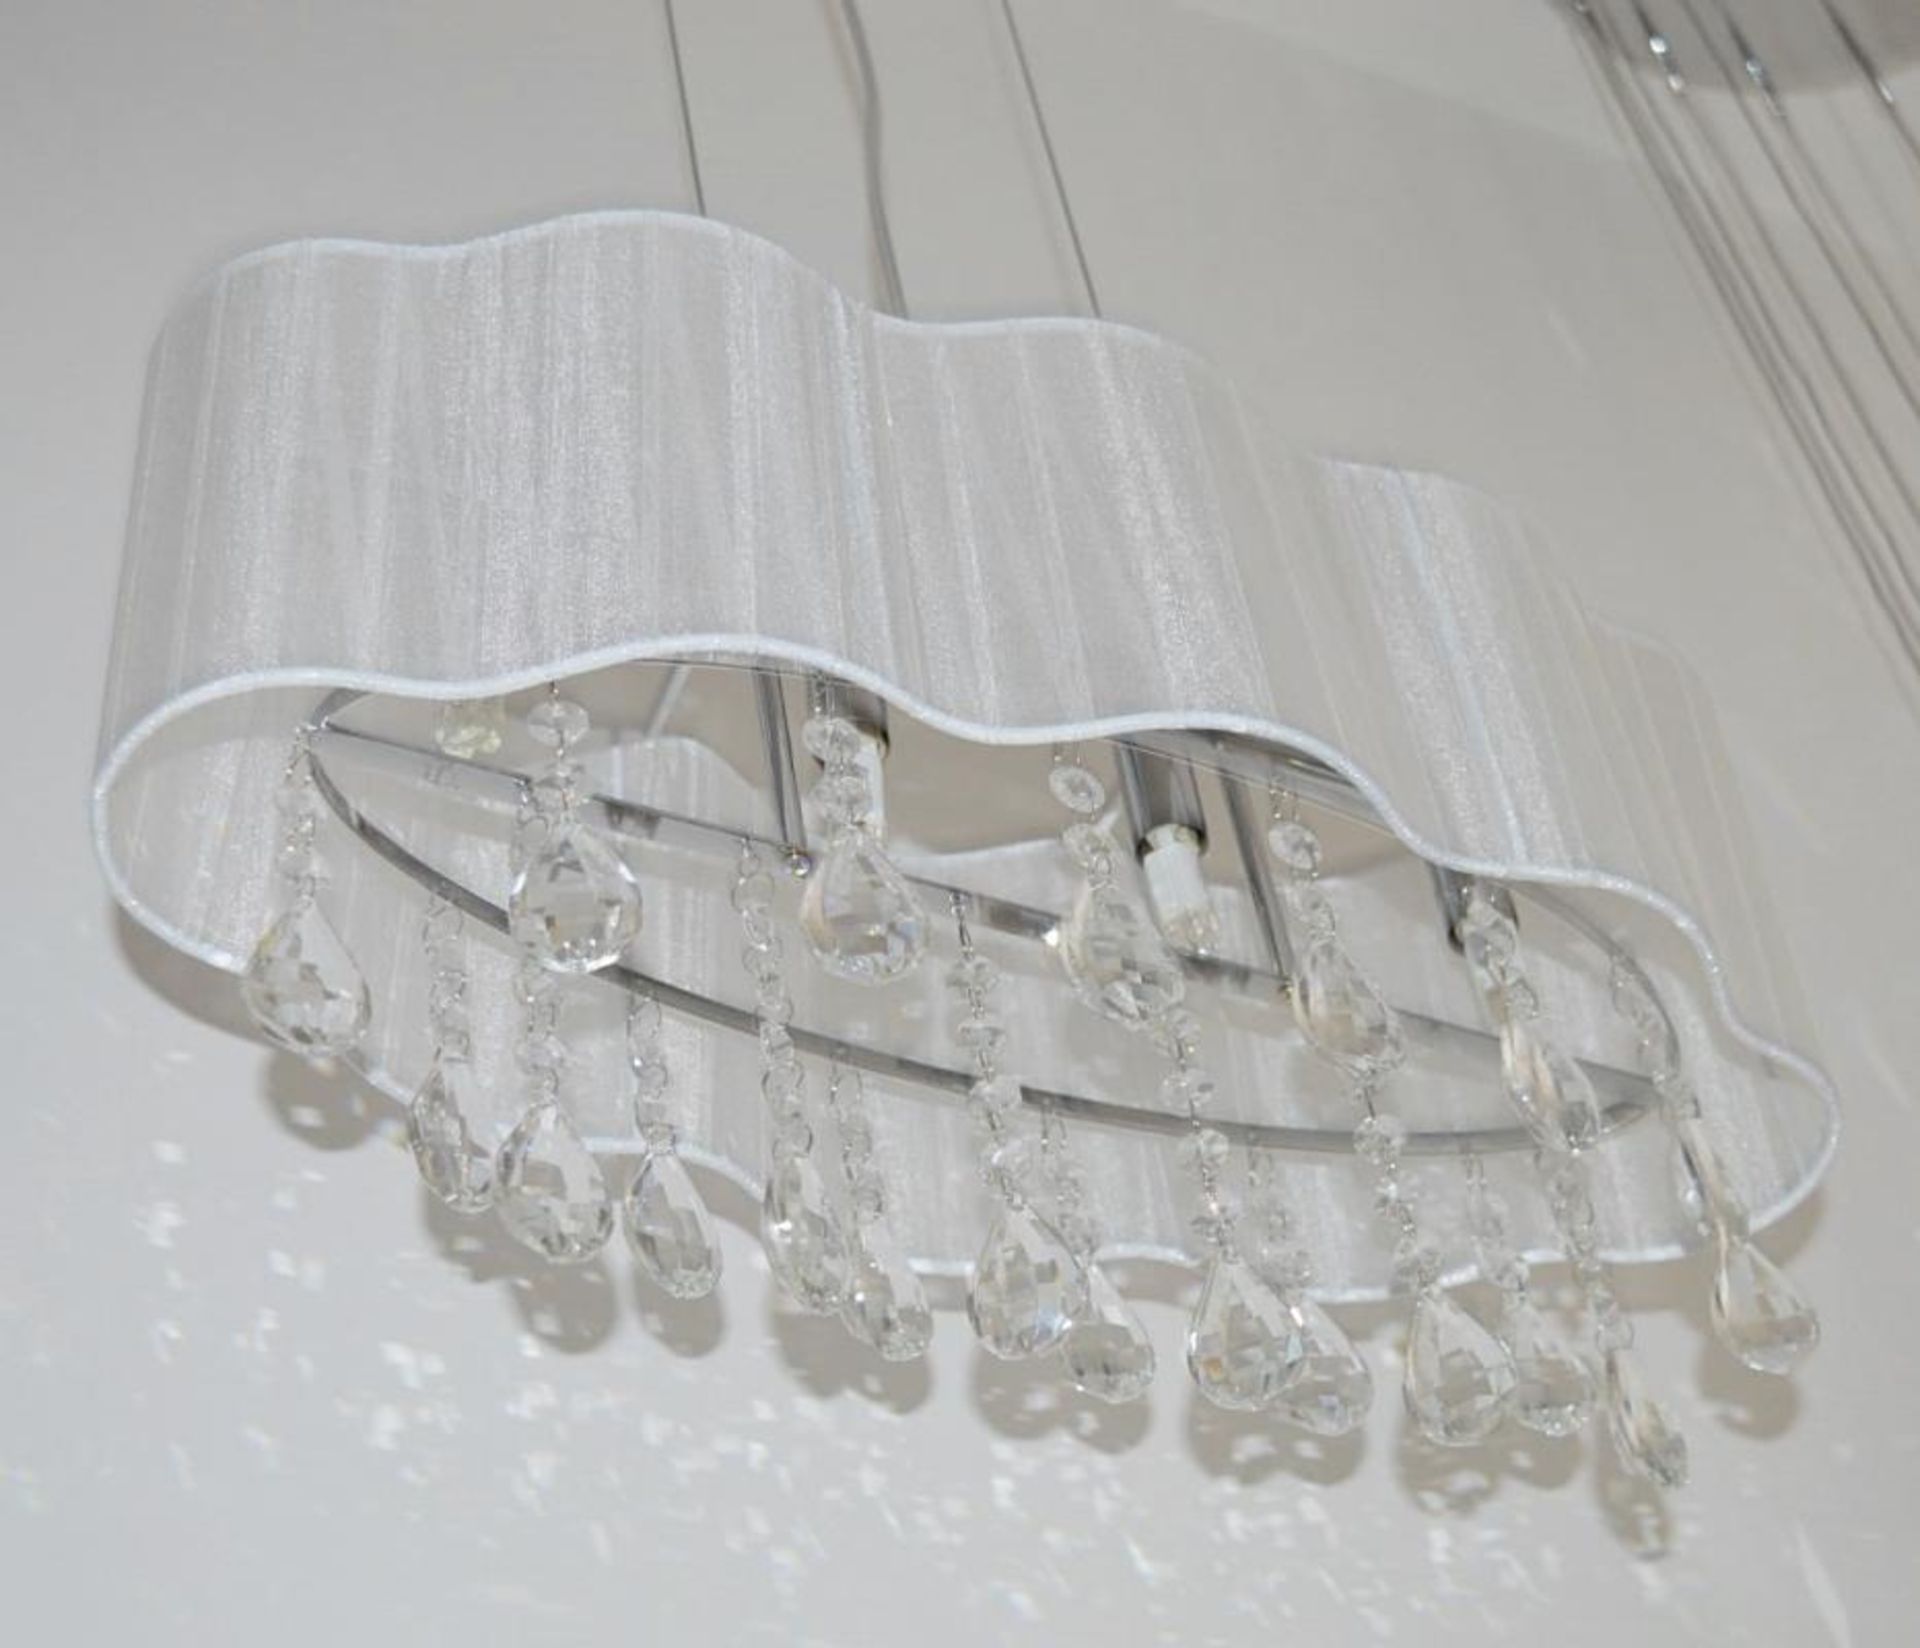 1 x Large Pleated 4-Light Ceiling Light - Features Clear Crystal Glass Drops And A Cream Voile Shade - Image 2 of 2